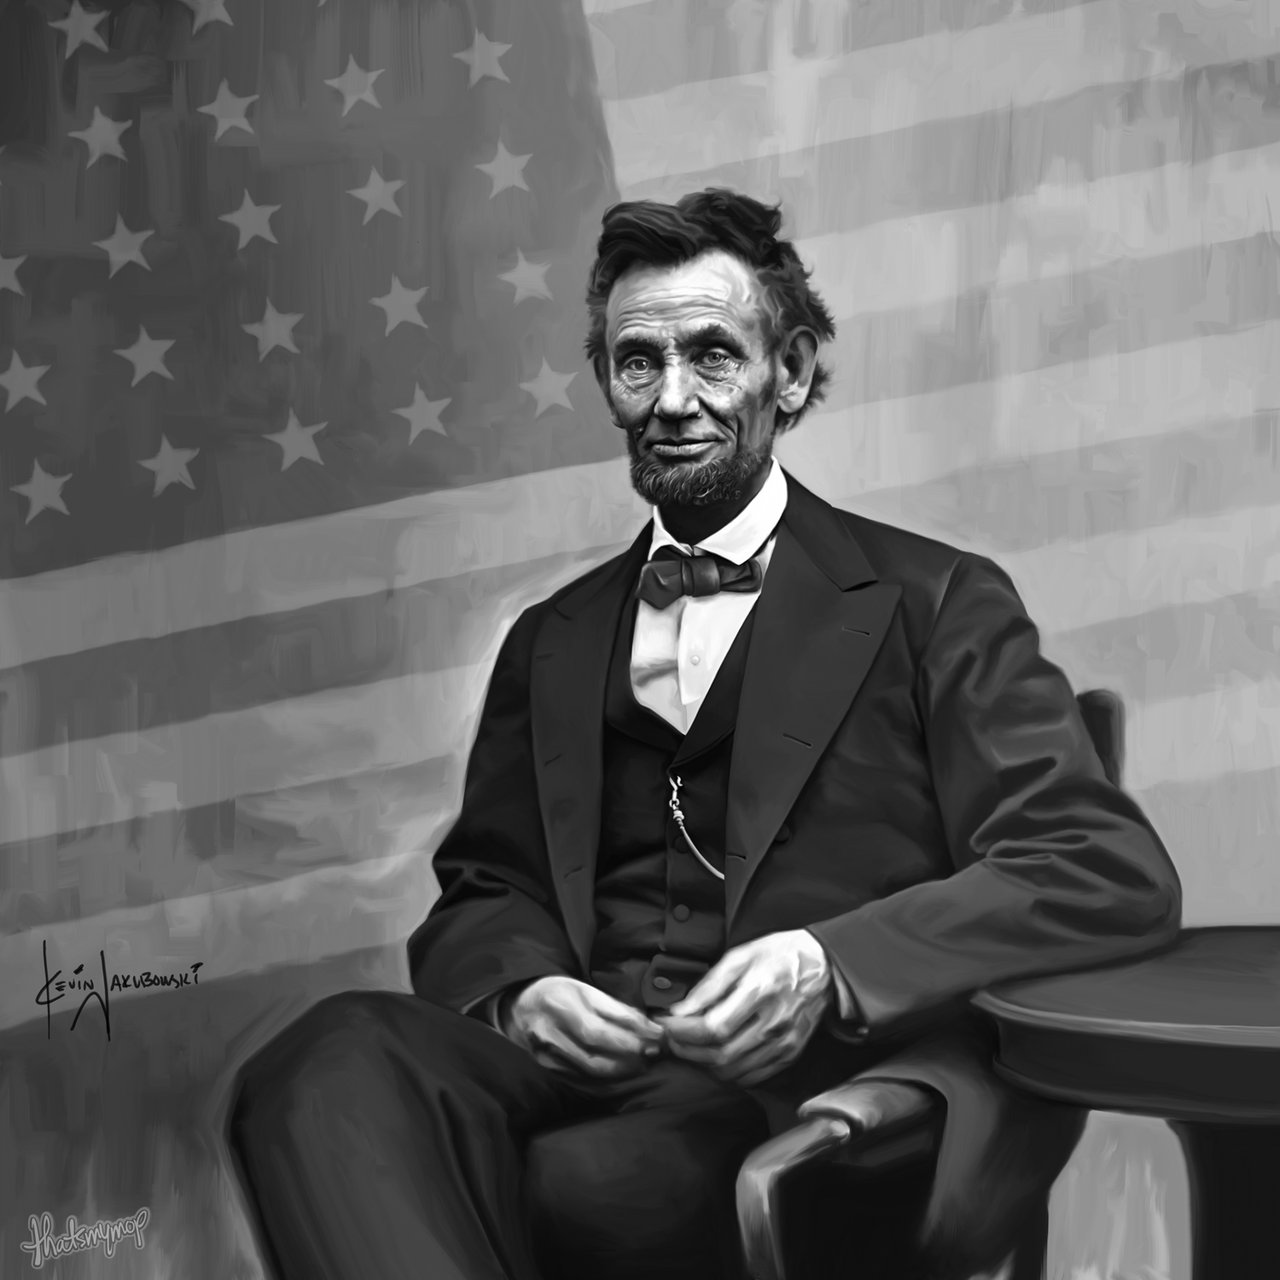 Abraham Lincoln Wallpapers